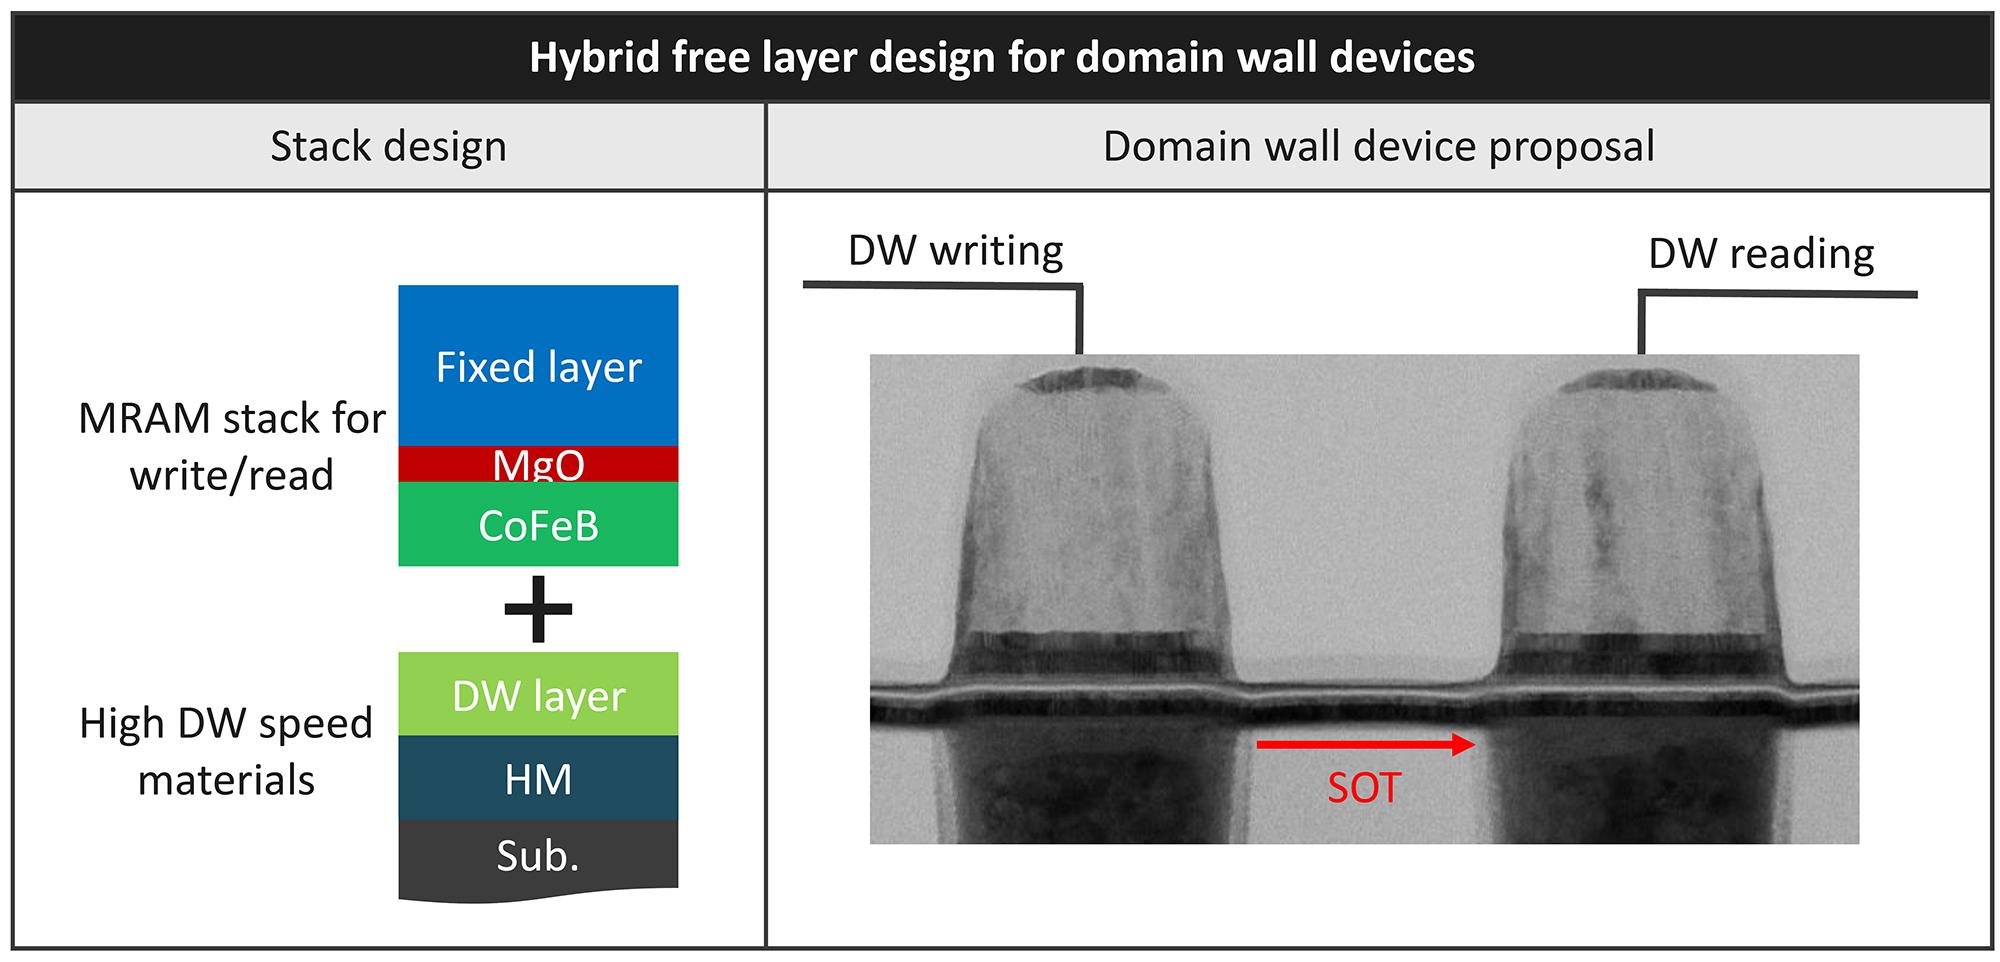 and TEM image of imec’s domain wall device with two MTJs for writing and reading. The MTJs implement a hybrid free layer with one layer for writing and reading, and one layer for SOT-enabled domain wall transfer (as presented at 2021 IEDM). 